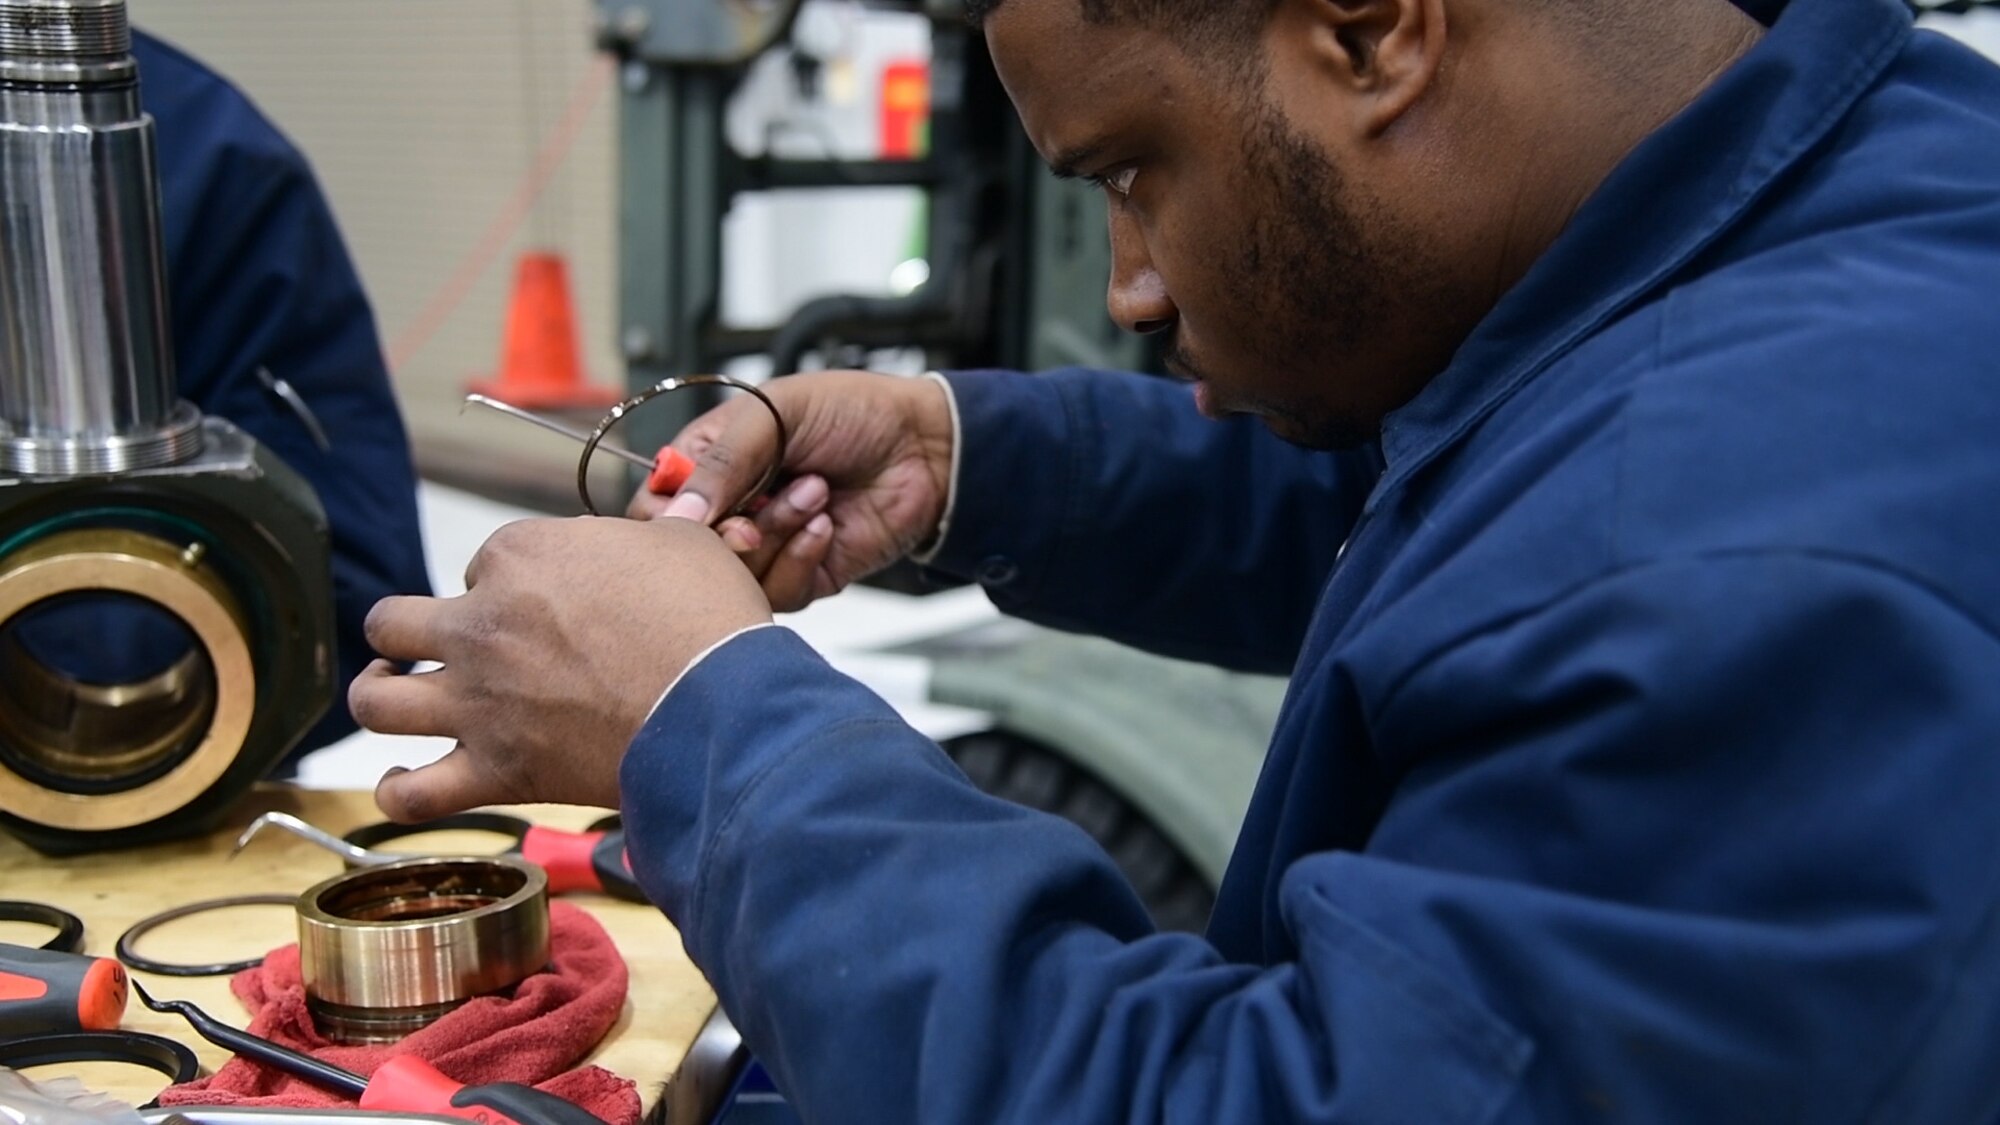 Staff Sgt. Leonard James, 436th Logistic Readiness Squadron vehicle maintenance, repairs a hydraulic component for a k-loader at Dover Air Force Base, Del., Jan. 29, 2020. James lost his fiancé and unborn daughter in a 2010 car accident while attending vehicle maintenance technical training. (U.S. Air Force photo by Tech. Sgt. Laura Beckley).